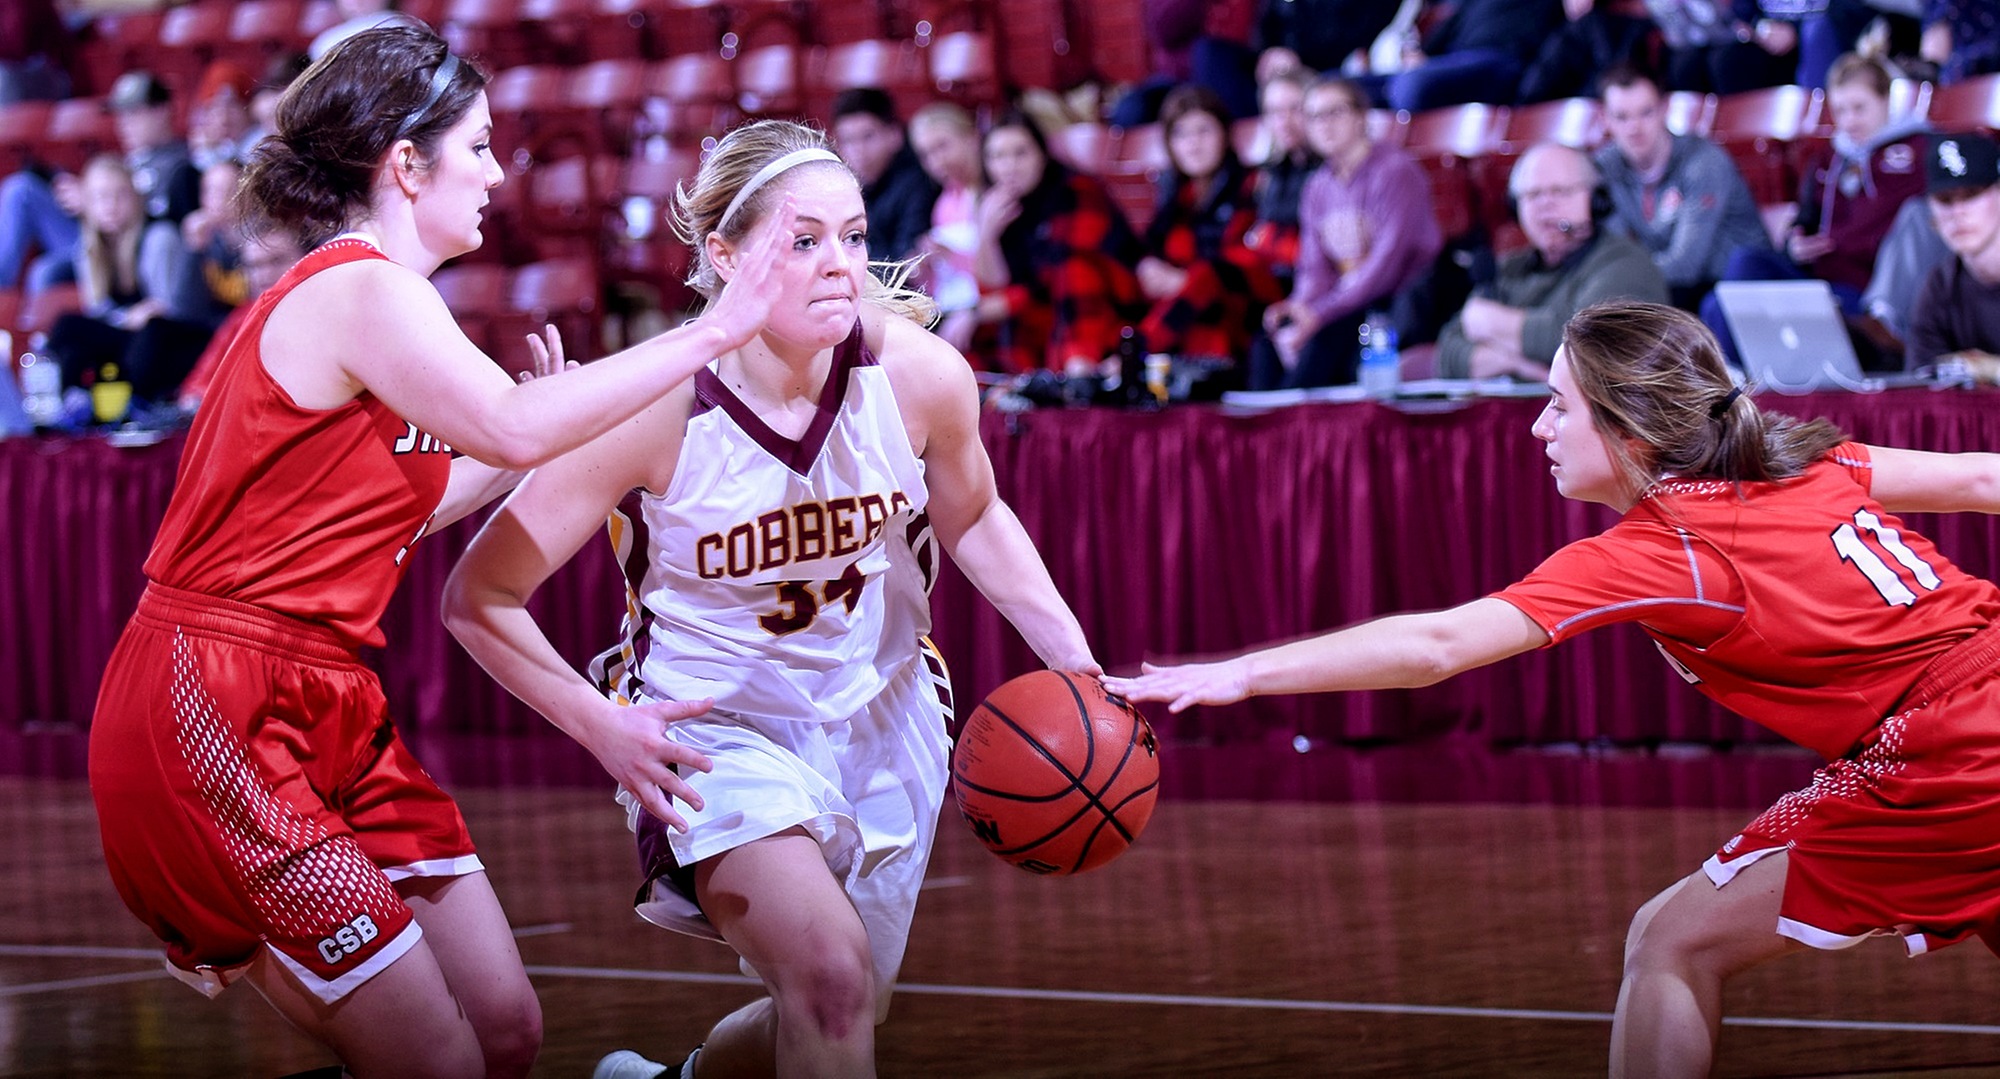 Senior Grace Wolhowe dribble through the defense in the second half of the Cobbers' game with St. Benedict. Wolhowe scored a career-high 27 points in the game.